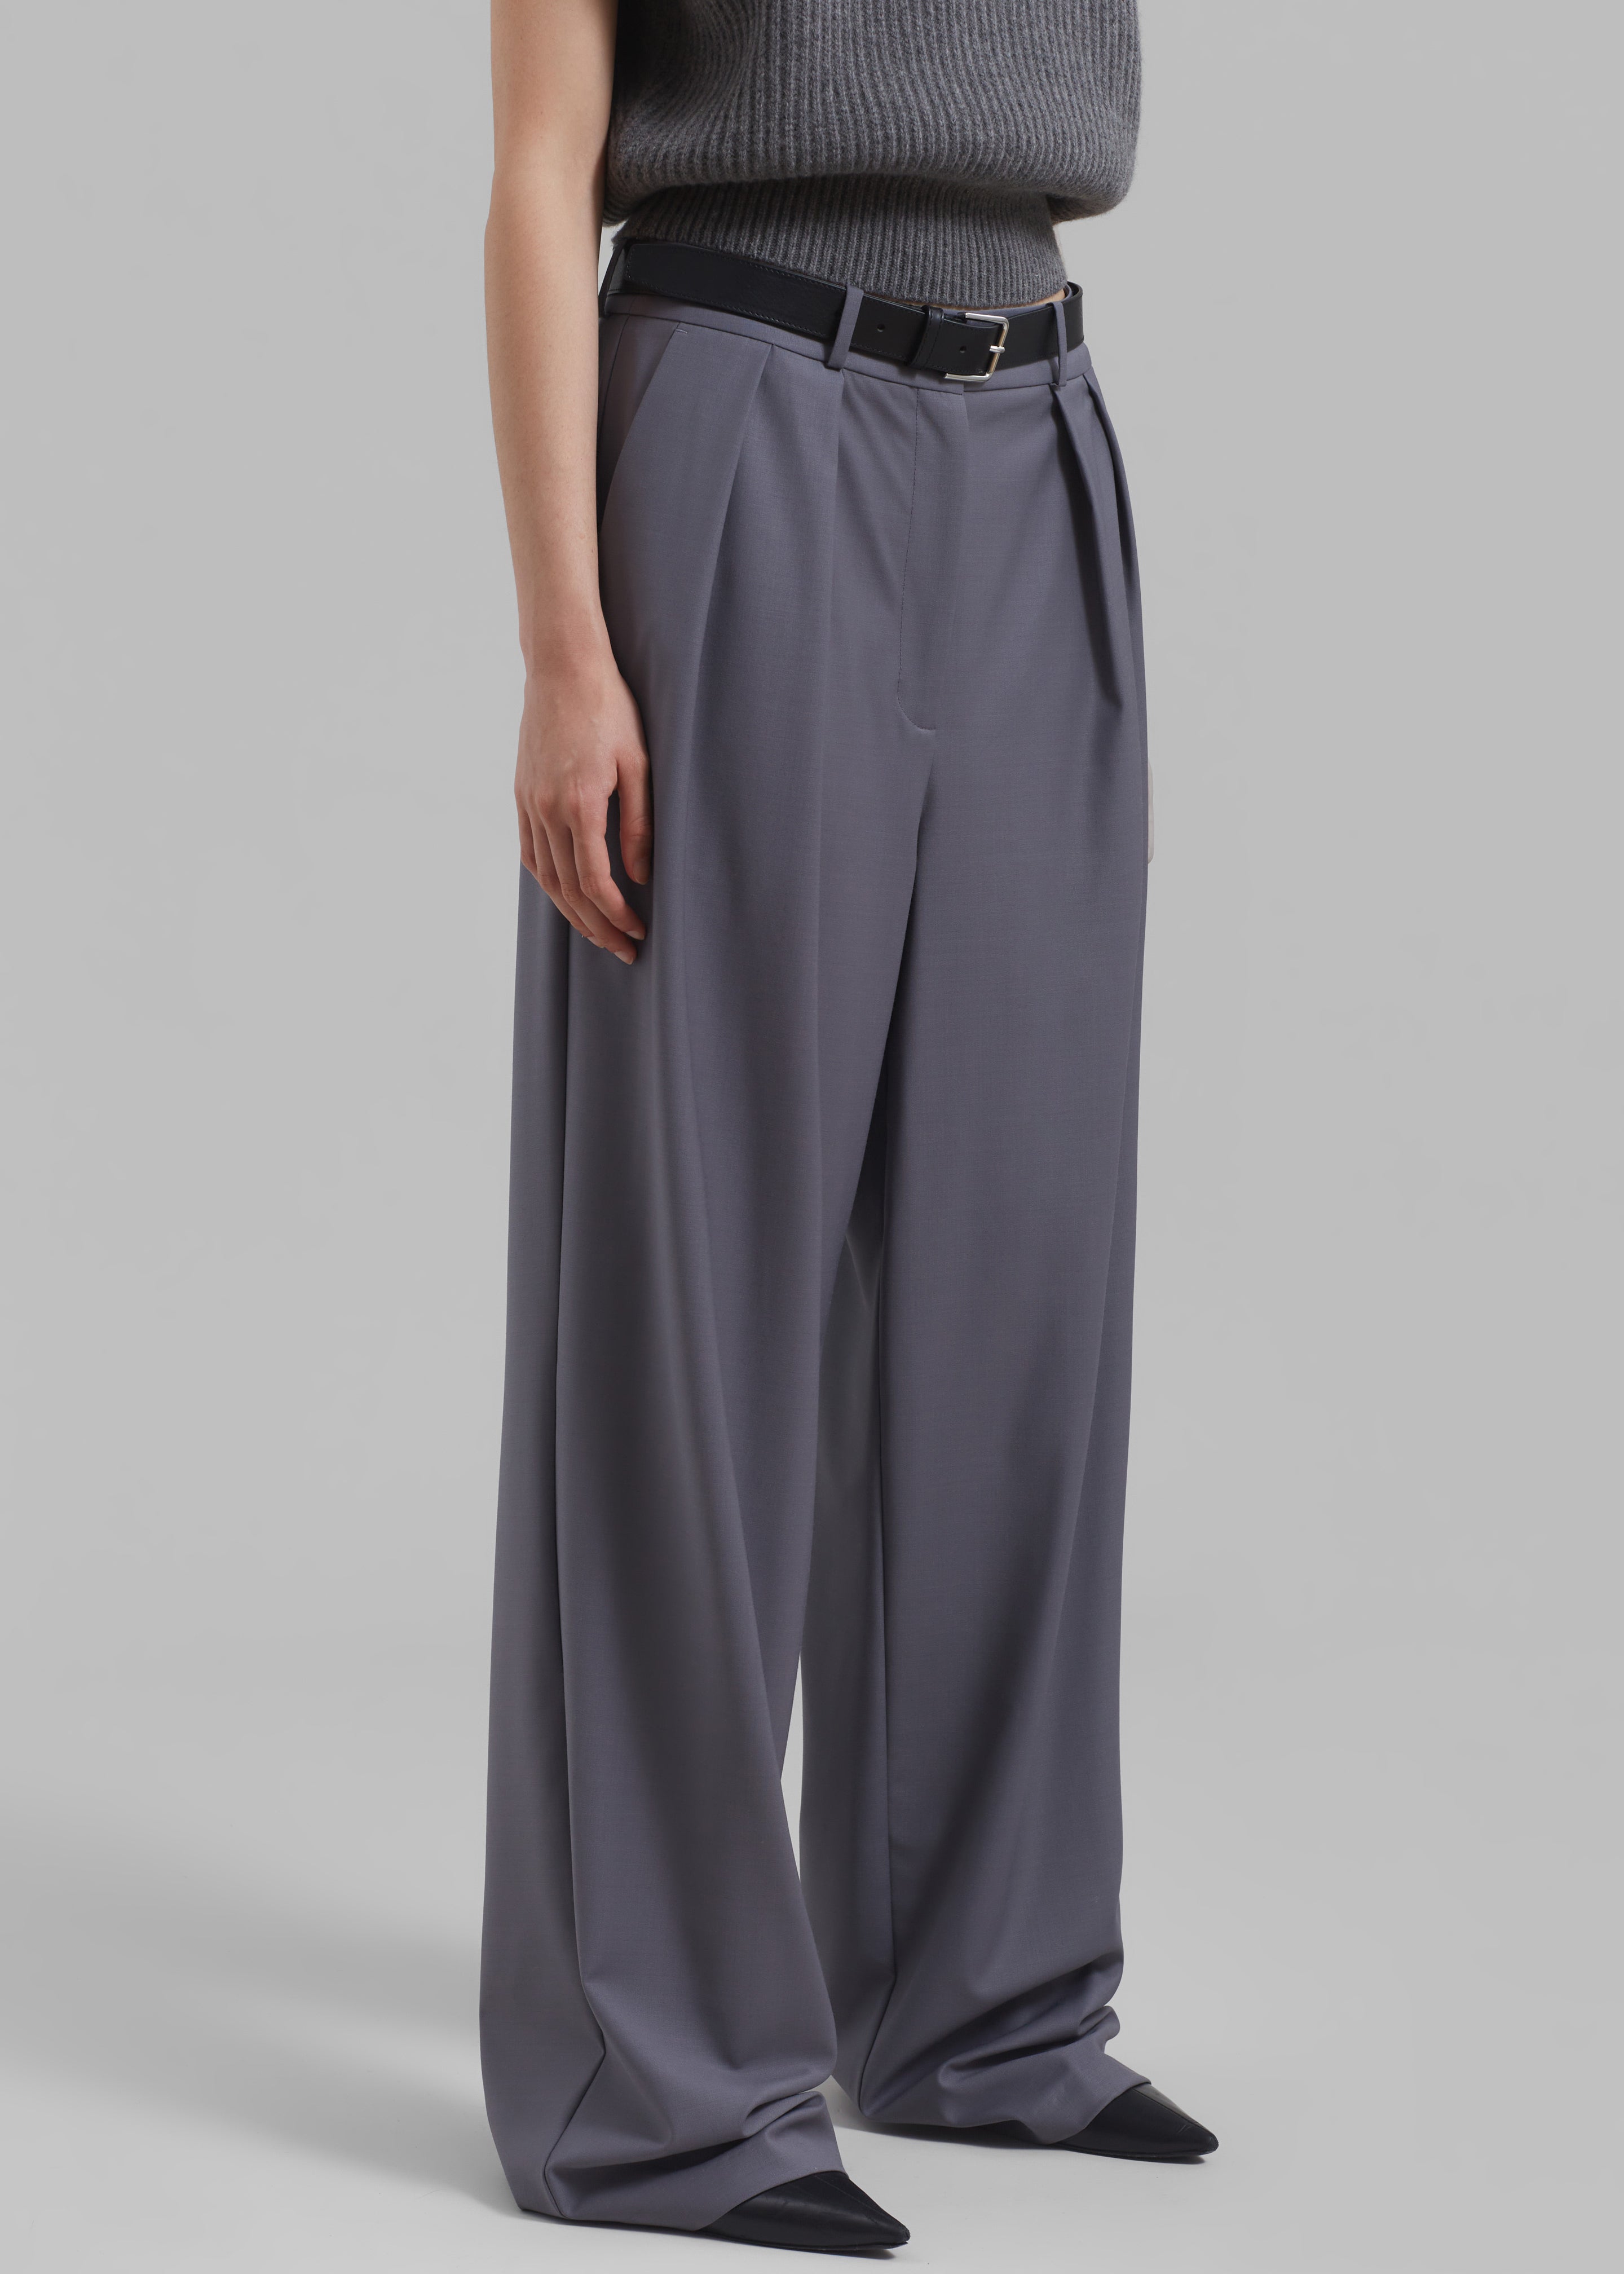 Ripley Pleated Trousers - Grey - 8